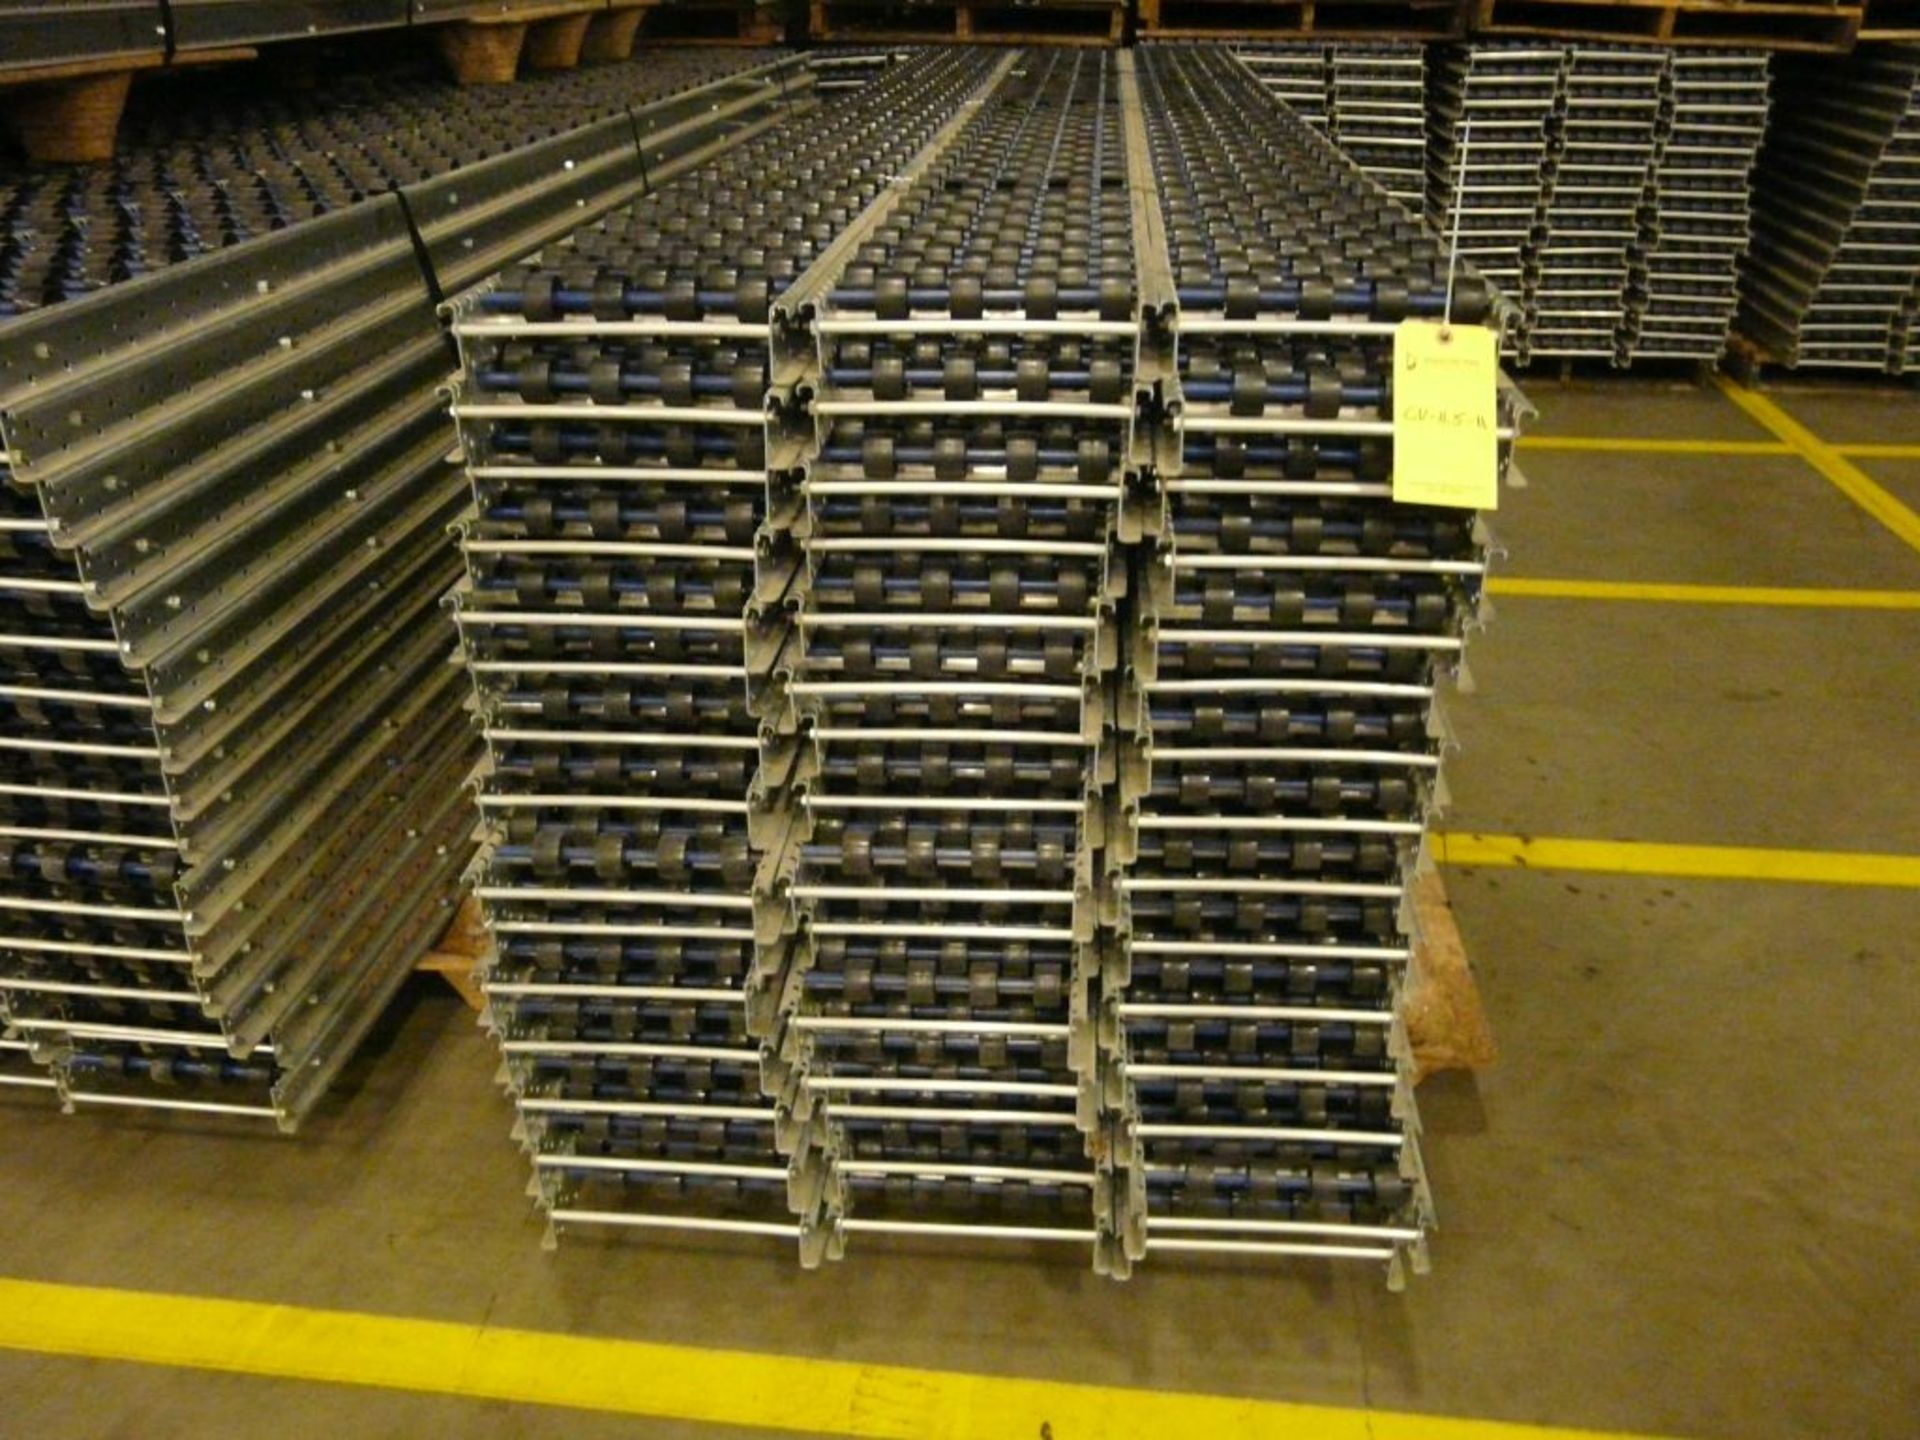 Lot of (90) SpanTrack Wheelbed Carton Flow Conveyors - 11.5'L x 11"W; Tag: 224229 - $30 Lot - Image 2 of 4